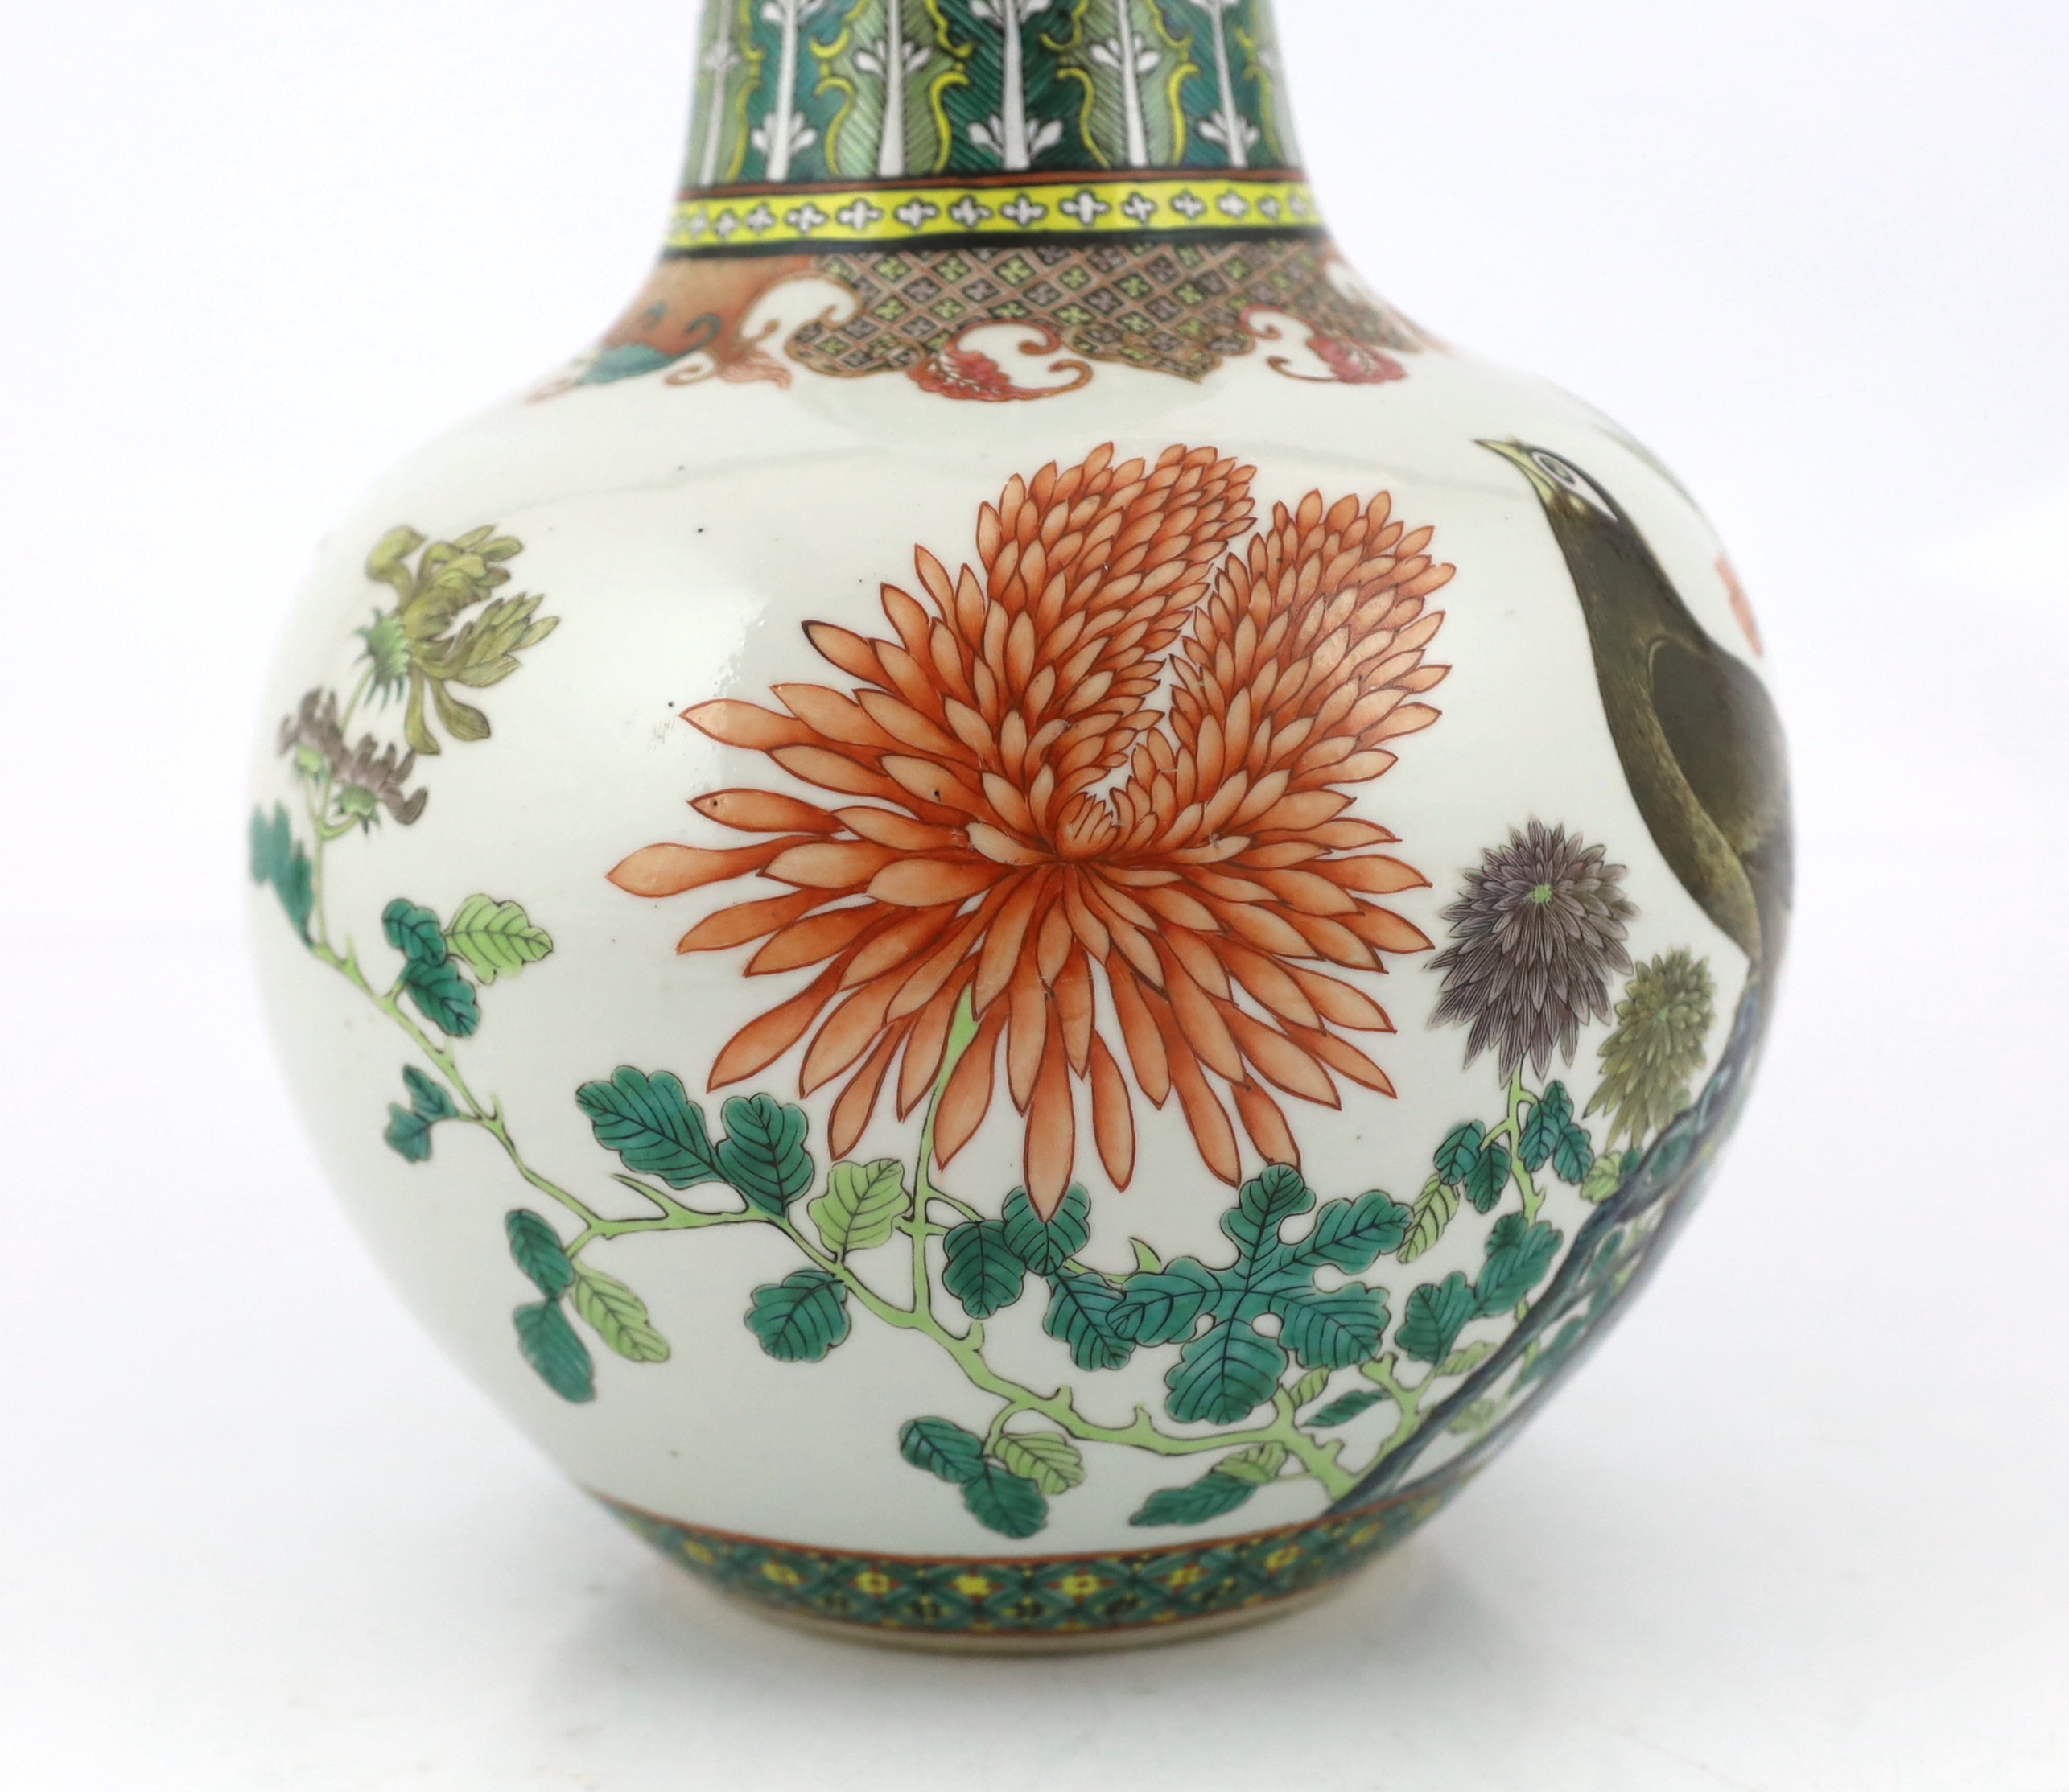 A Chinese famille verte ‘black bird’ bottle vase, Daoguang mark and of the period (1821-50), neck restored